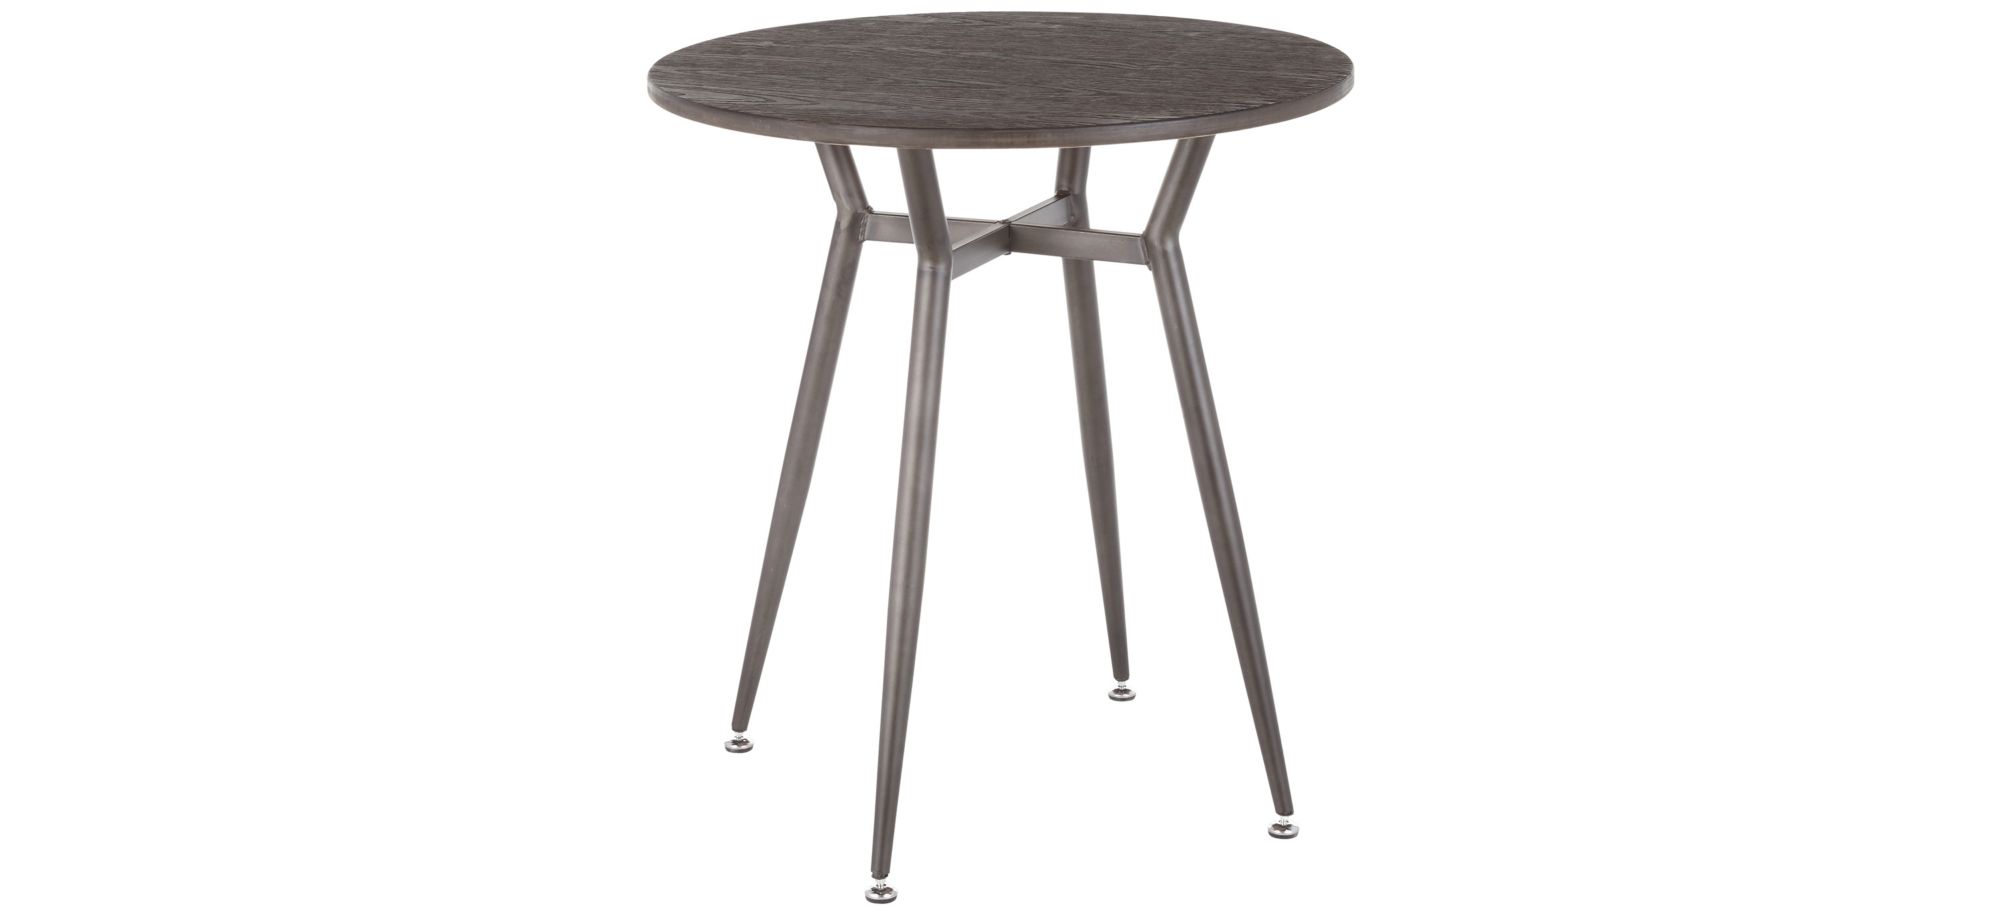 Clara Round Dining Table in Antique, Espresso by Lumisource